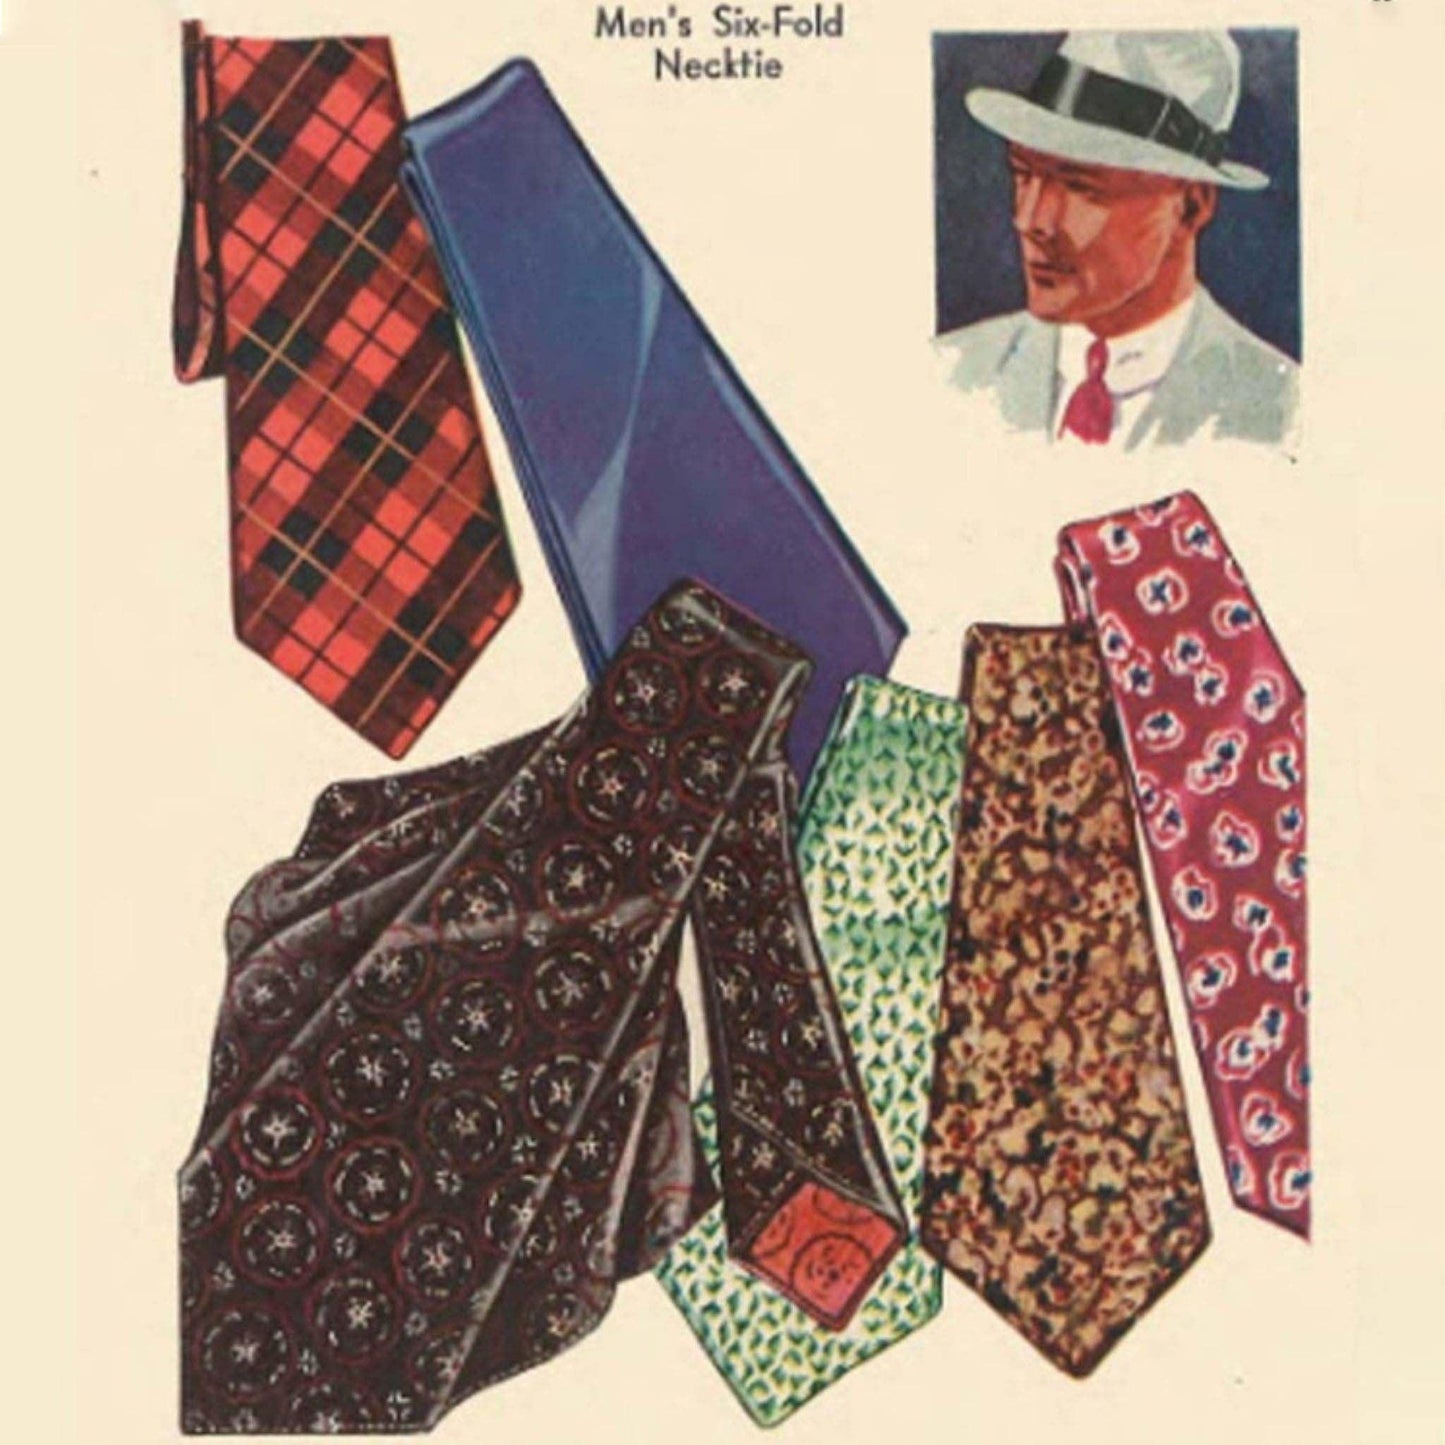 Vintage 1930s Sewing Pattern, 'Easy to Sew' Men's Six Fold Necktie